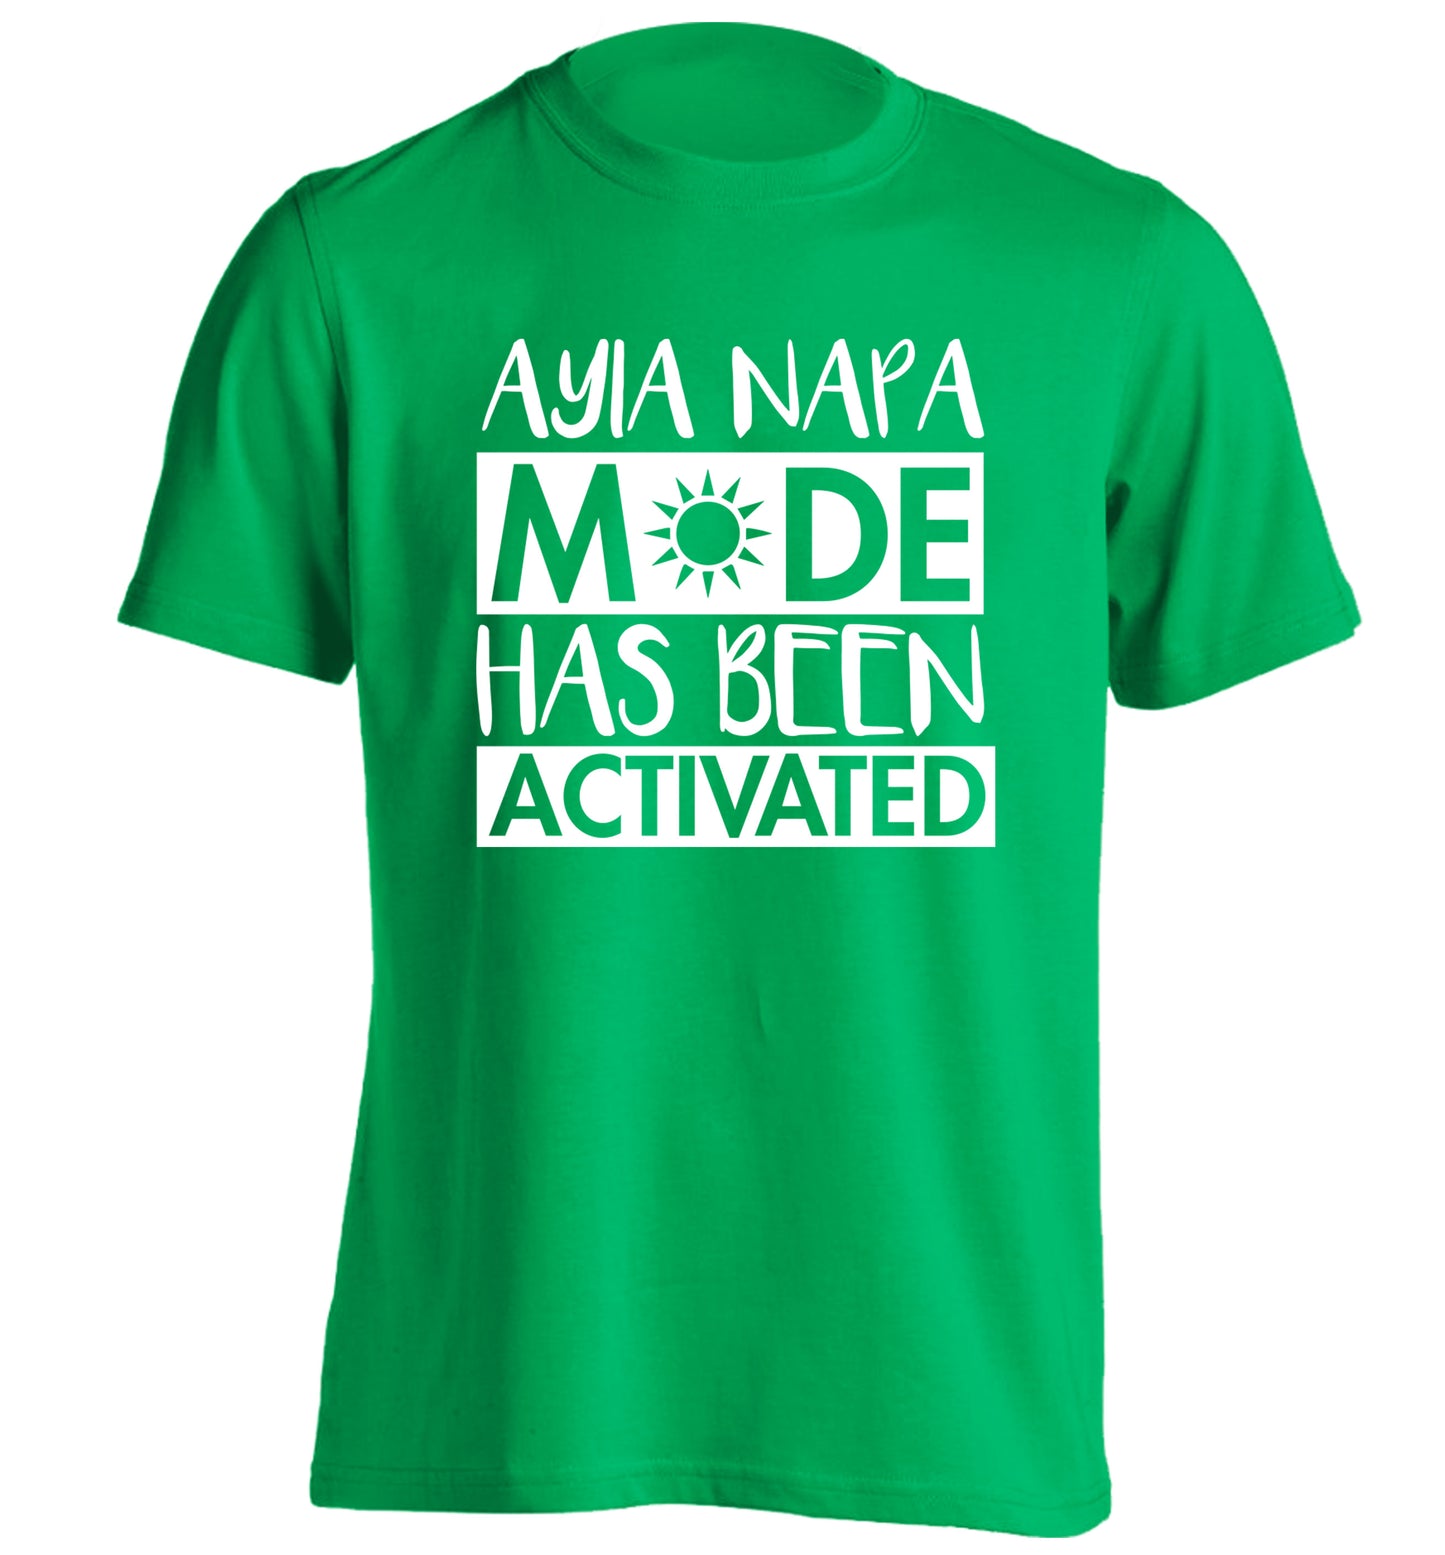 Ayia Napa mode has been activated adults unisex green Tshirt 2XL